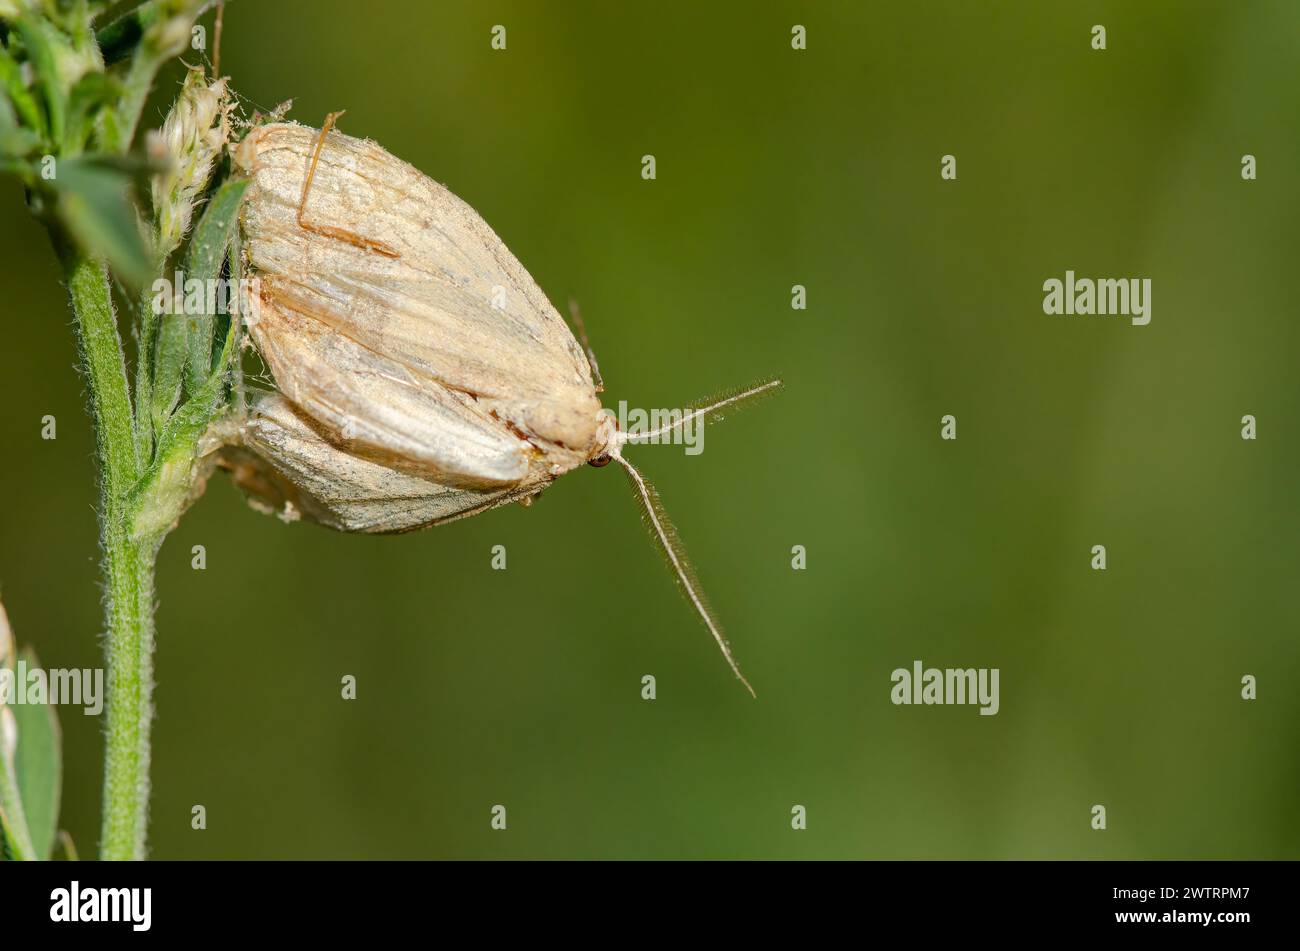 A moth on a plant leaf, green coloured background. Stock Photo